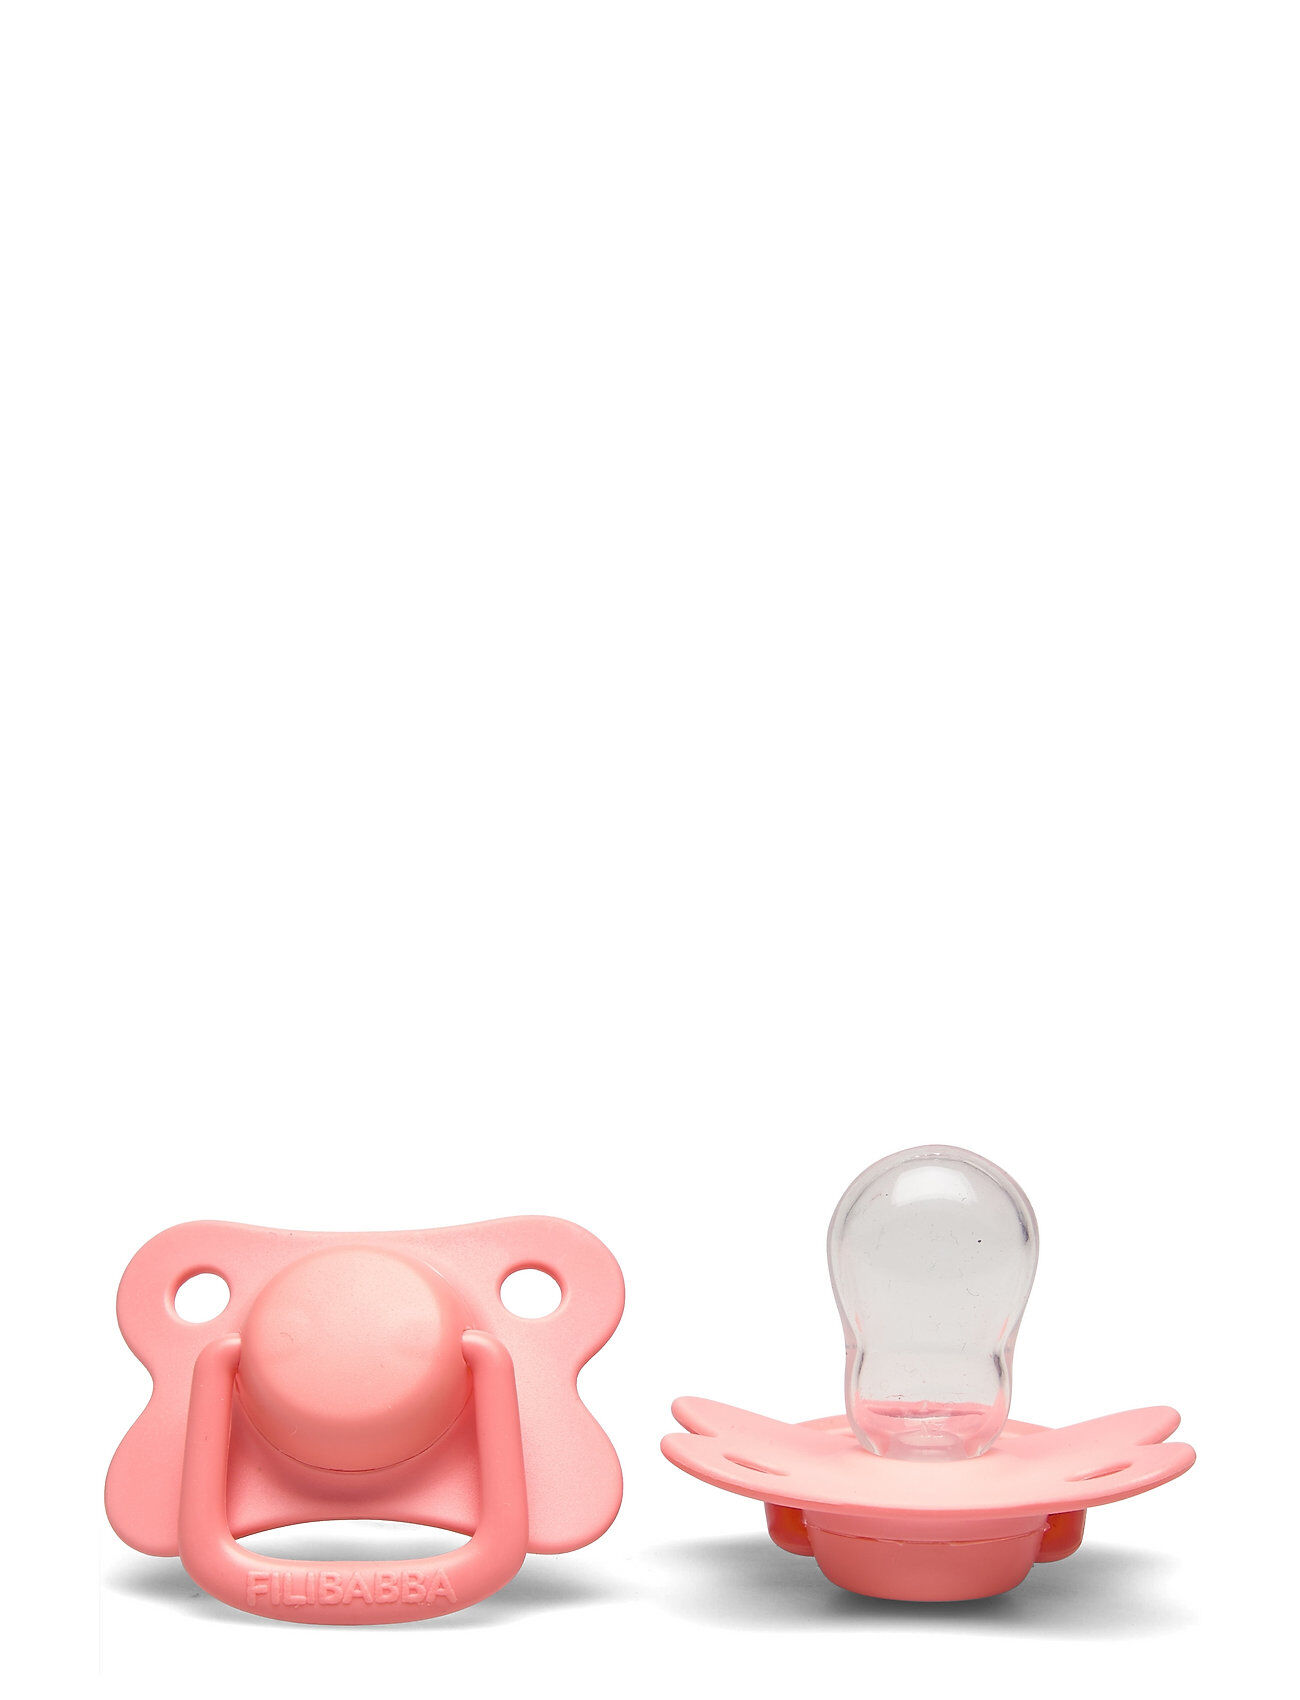 Filibabba 2-Pack Pacifiers - Coral +6 Months Baby & Maternity Pacifiers Rosa Filibabba